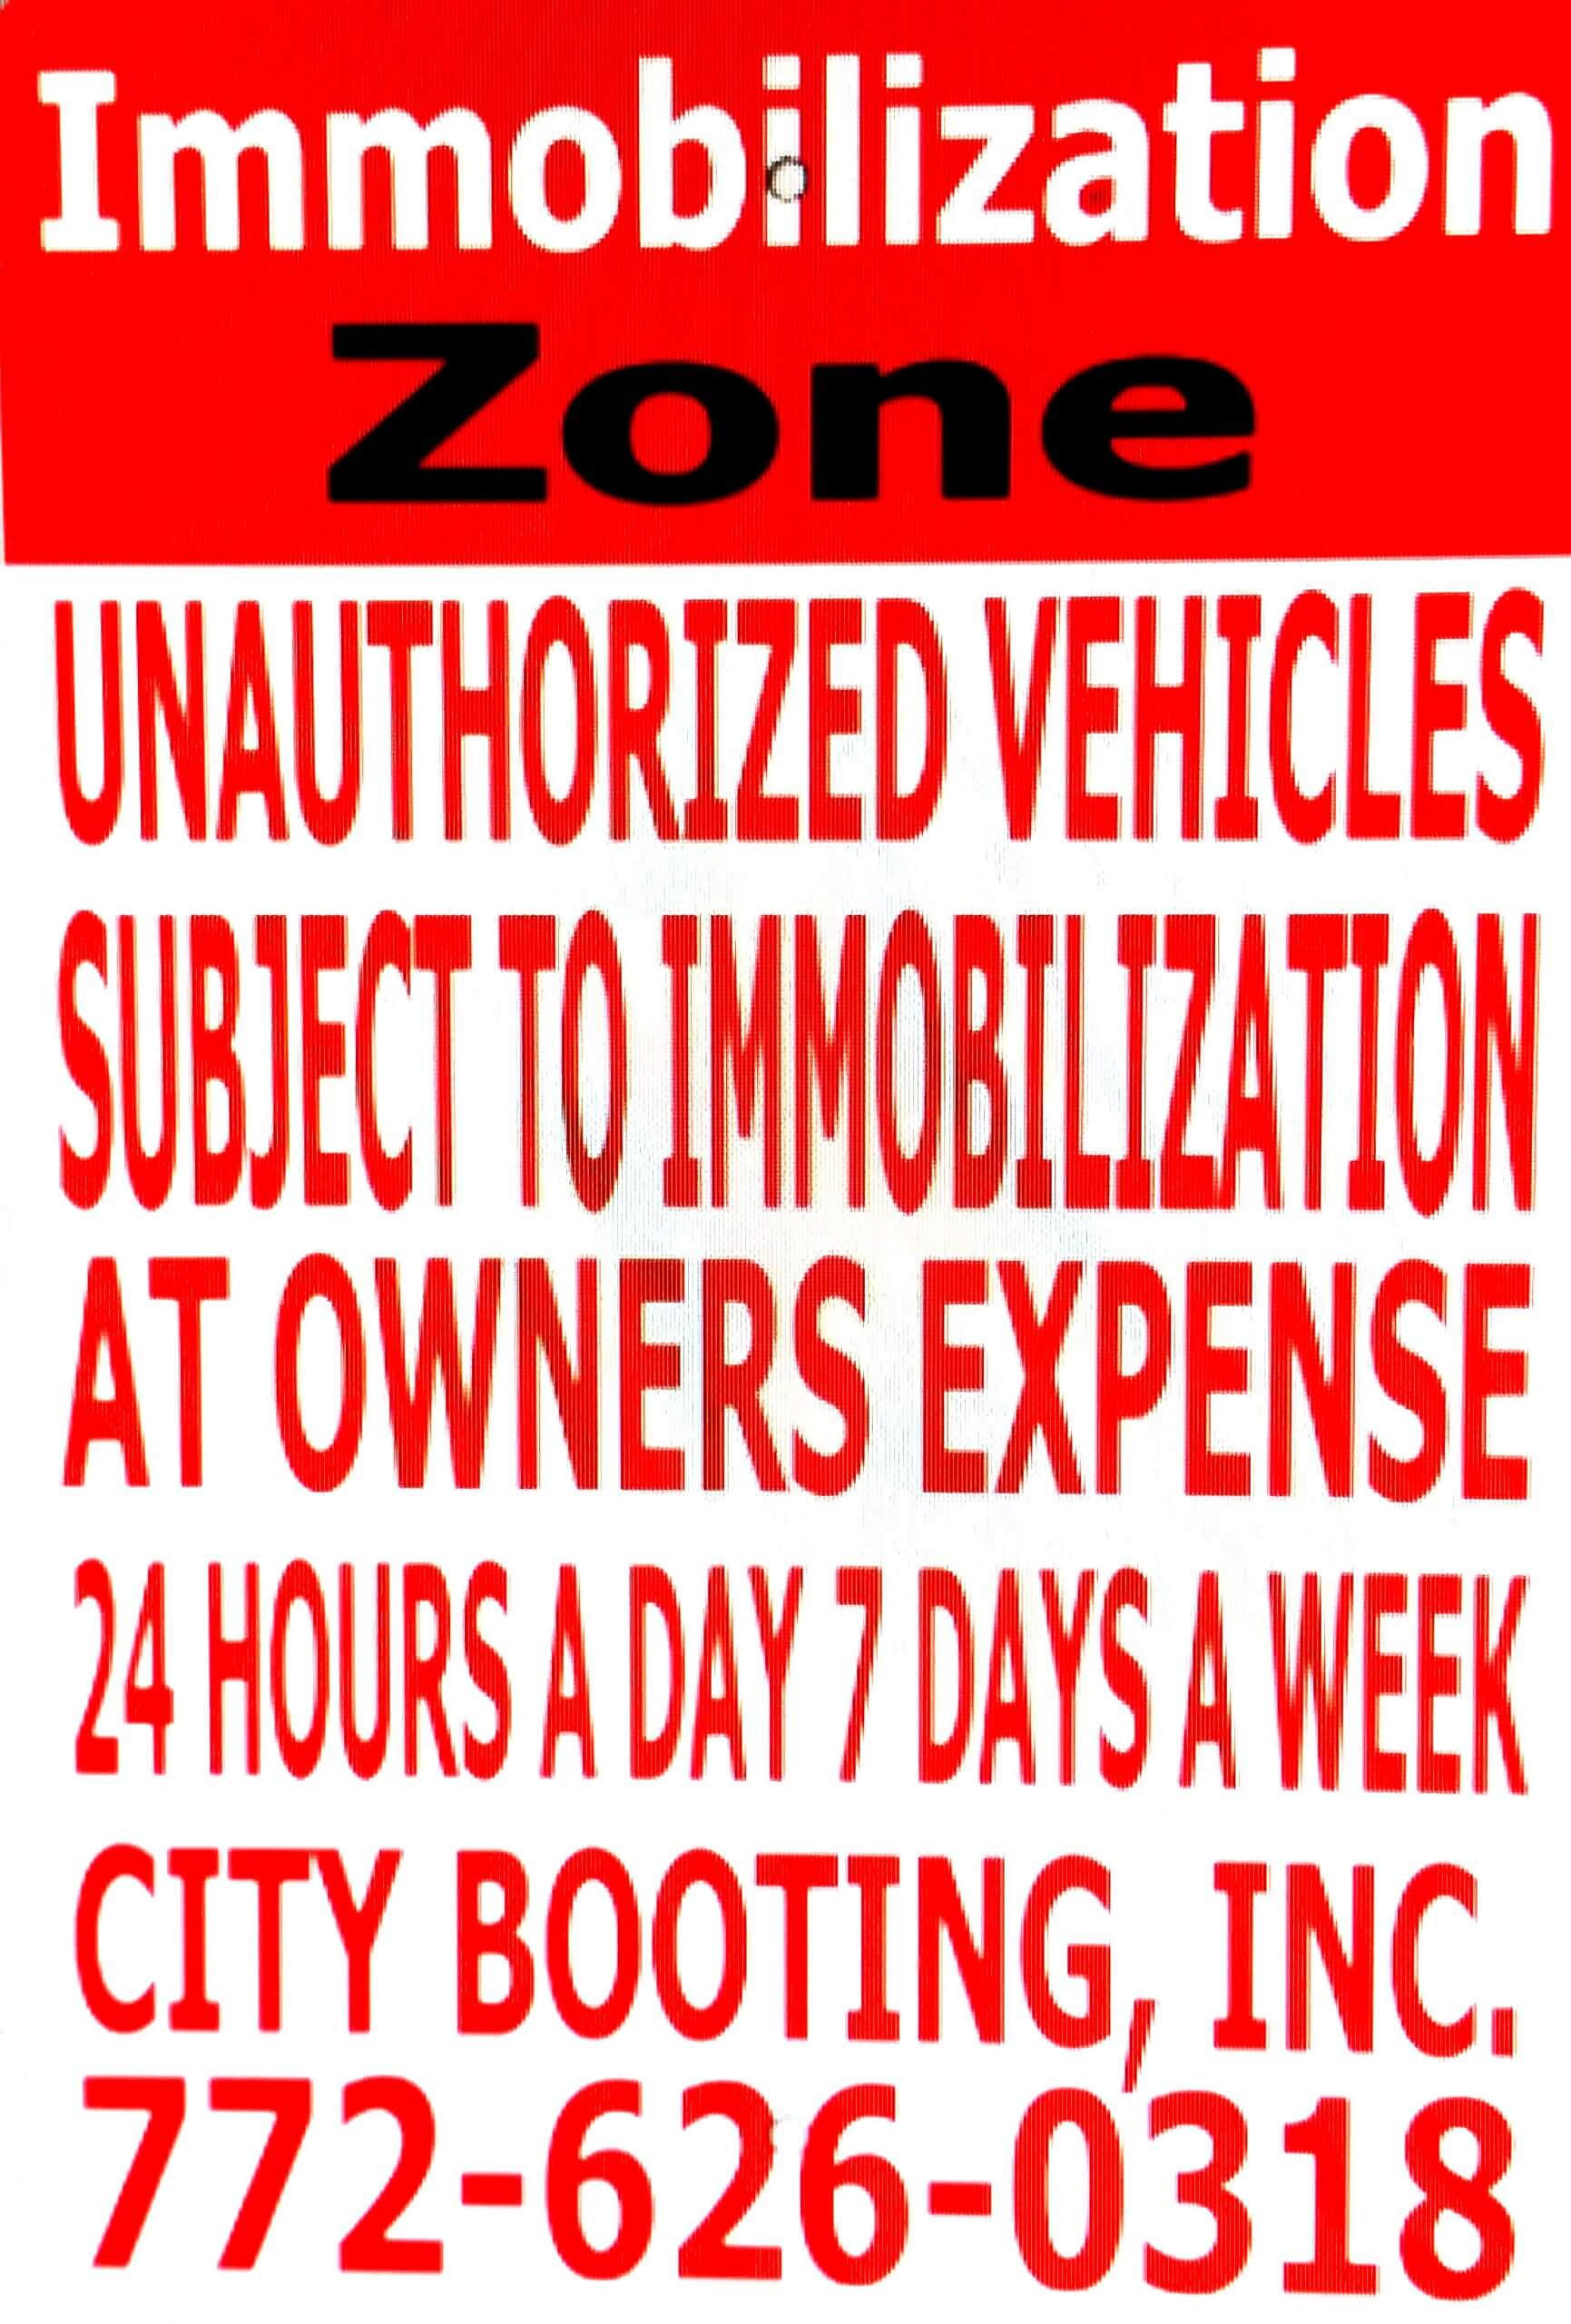 A poster of immobilization zone with red background